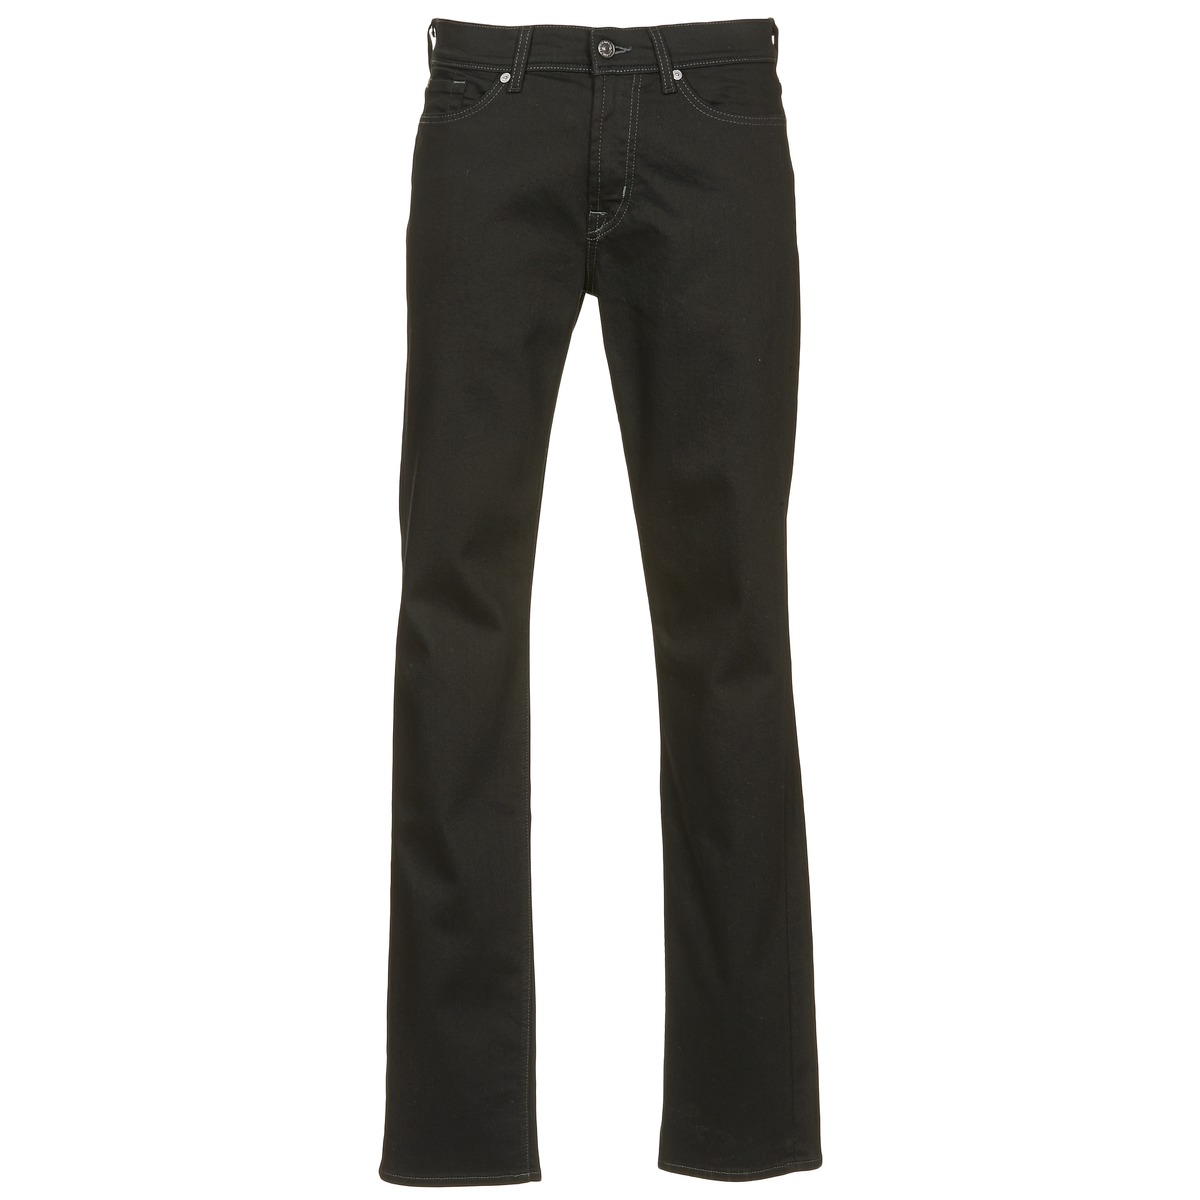 7 for all Mankind Noir SLIMMY LUXE PERFORMANCE grxtbsRc